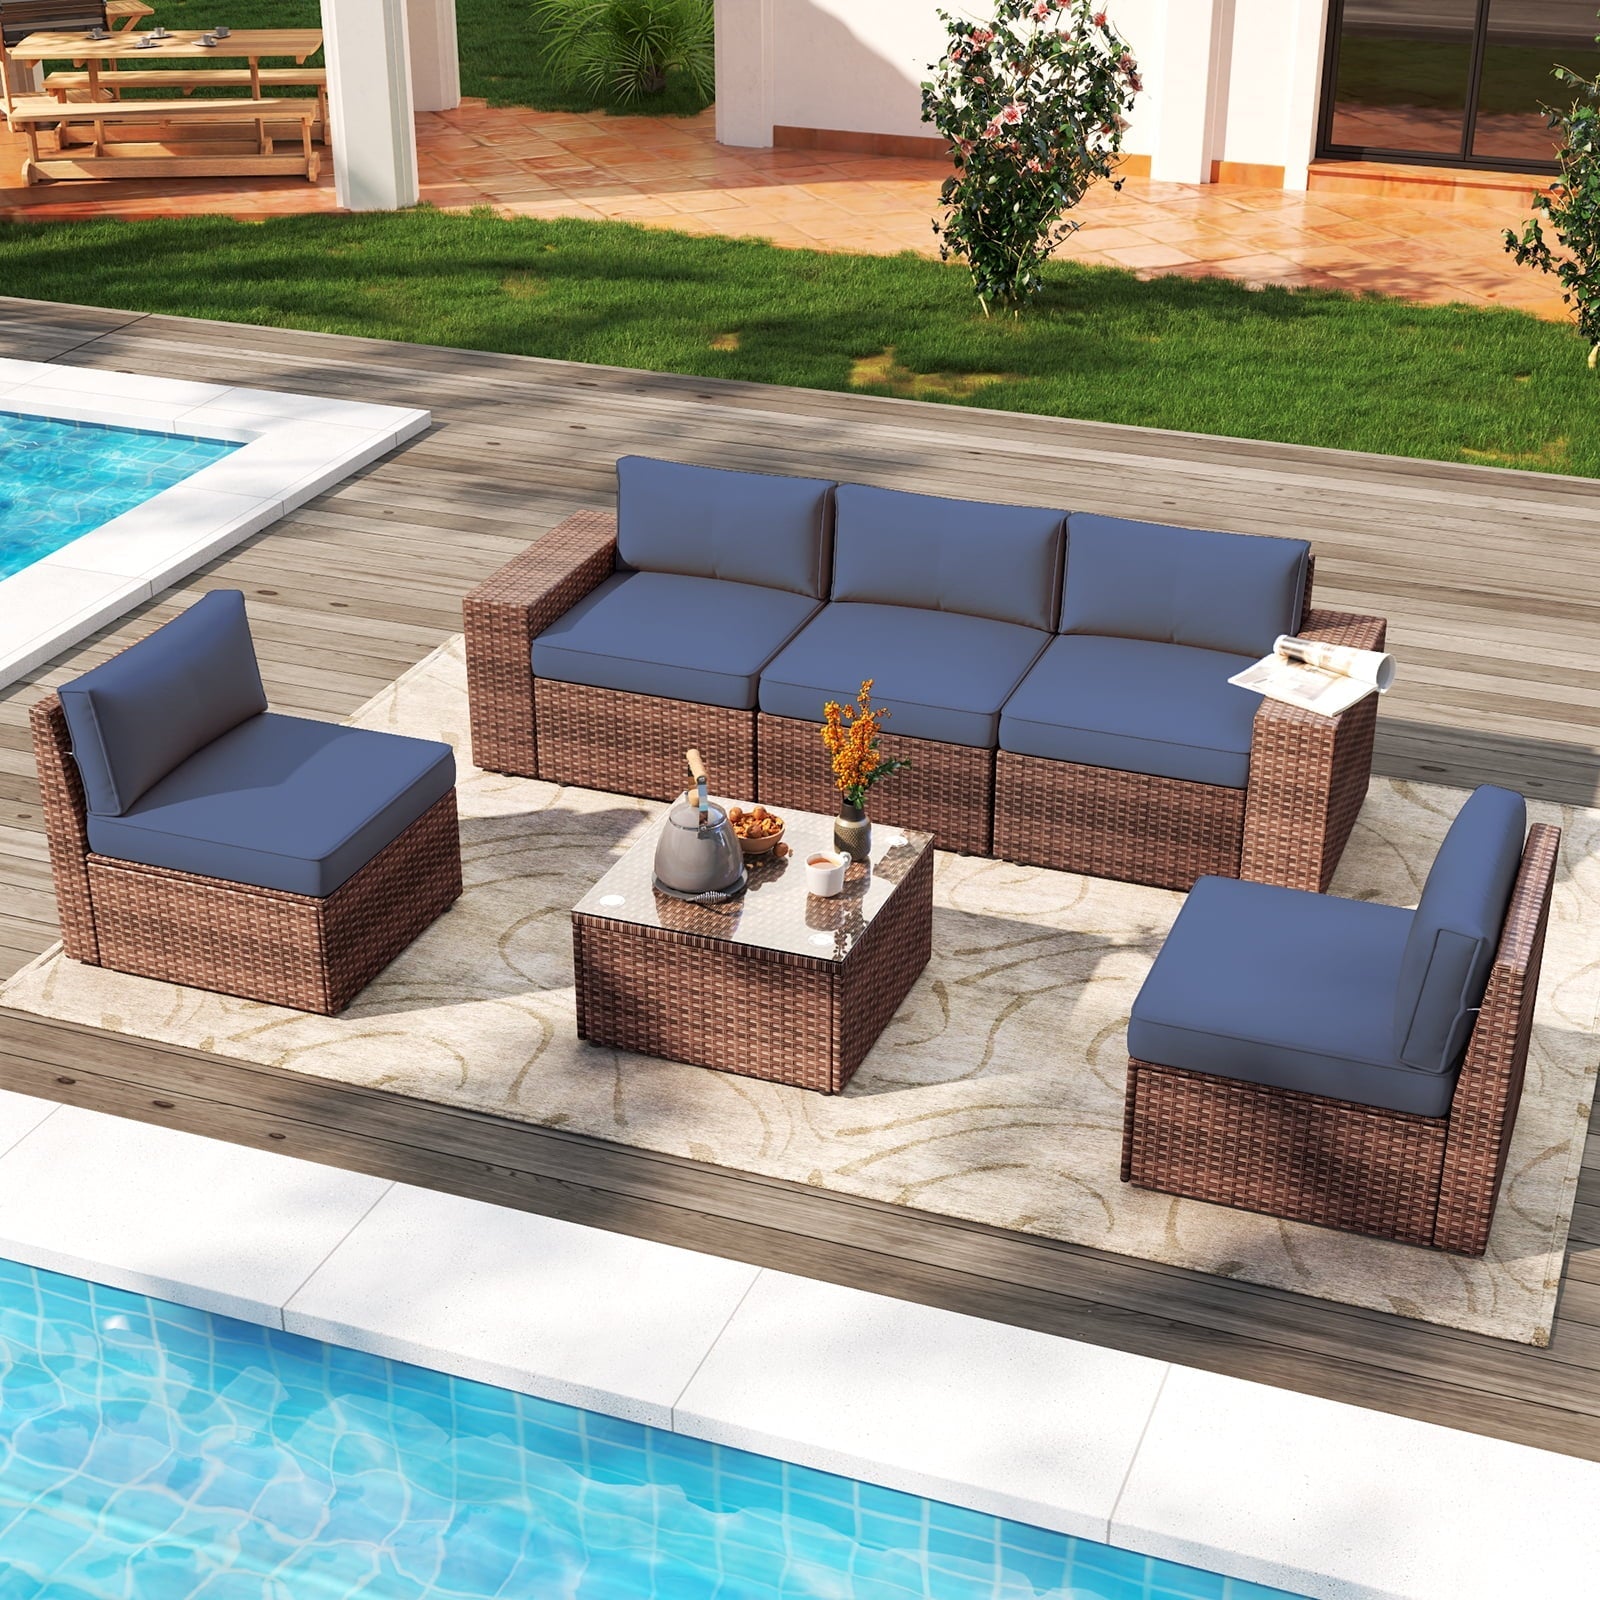 6 Pieces Patio Furniture Sets With Waterproof Cover, Outdoor Sectional Rattan Sofa Set, Outdoor Furniture Set with Coffee Table, Blue